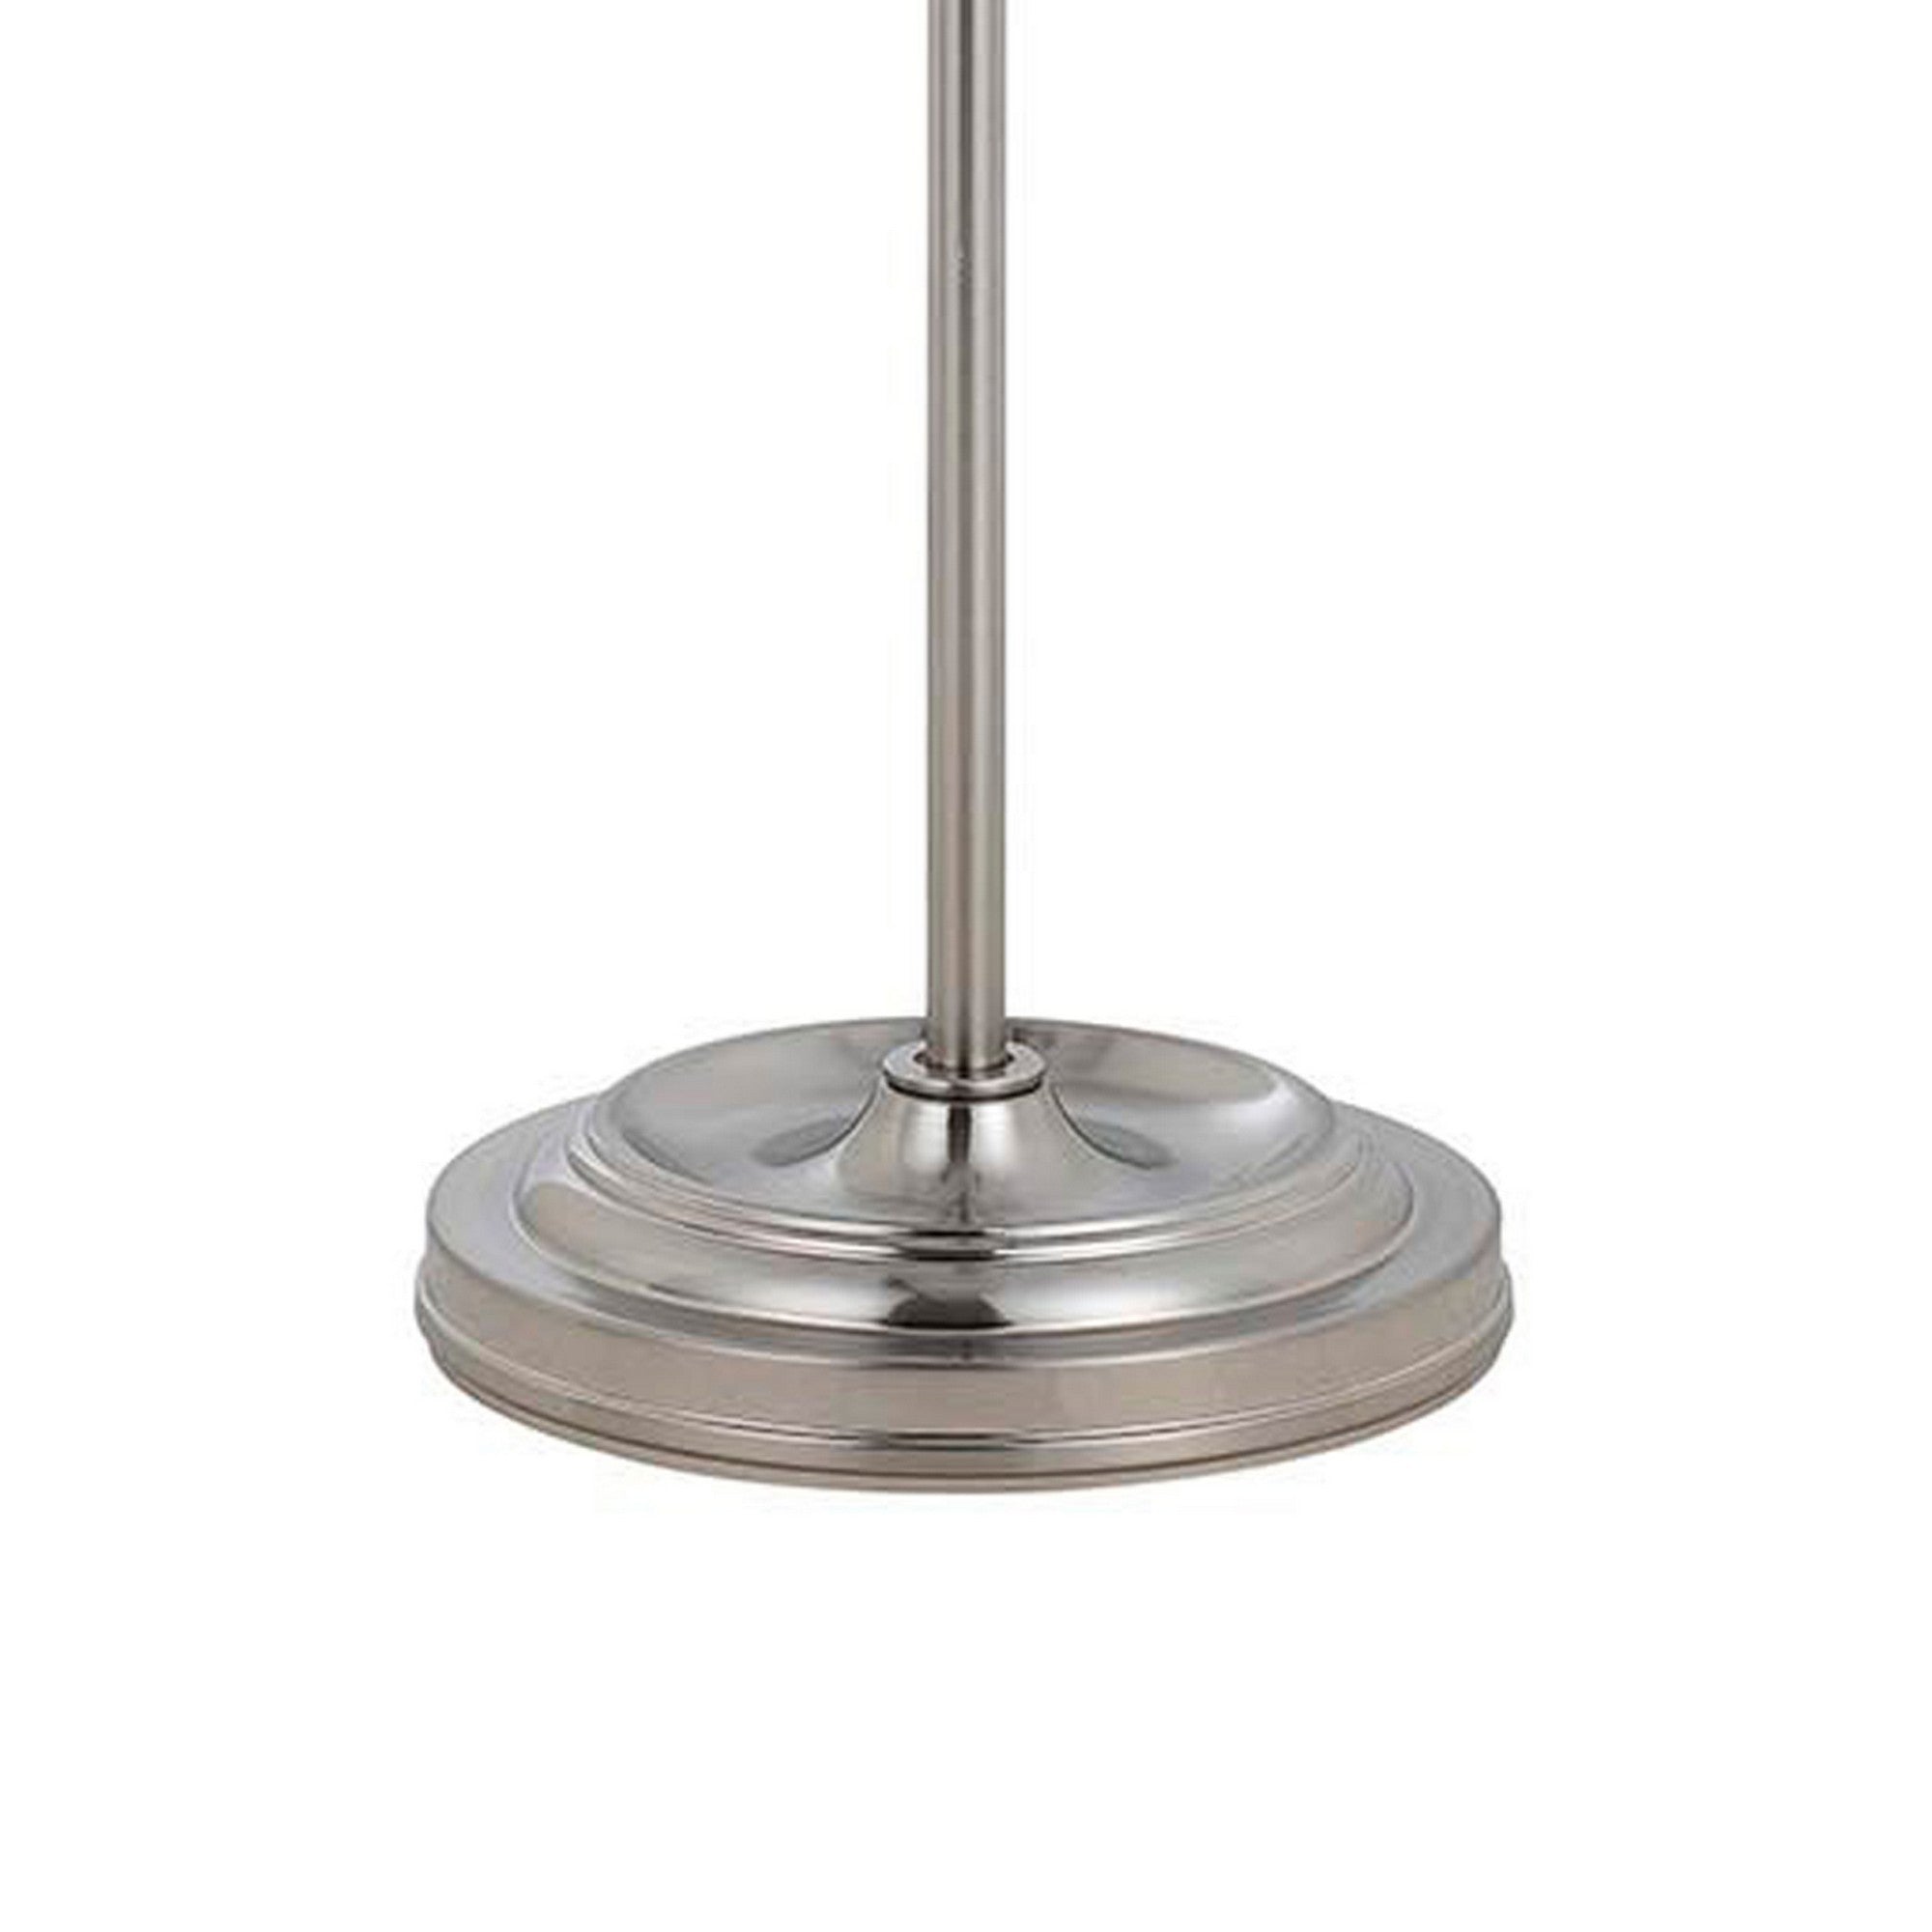 Adjustable Height Metal Pharmacy Lamp With Pull Chain Switch, Silver By Benzara